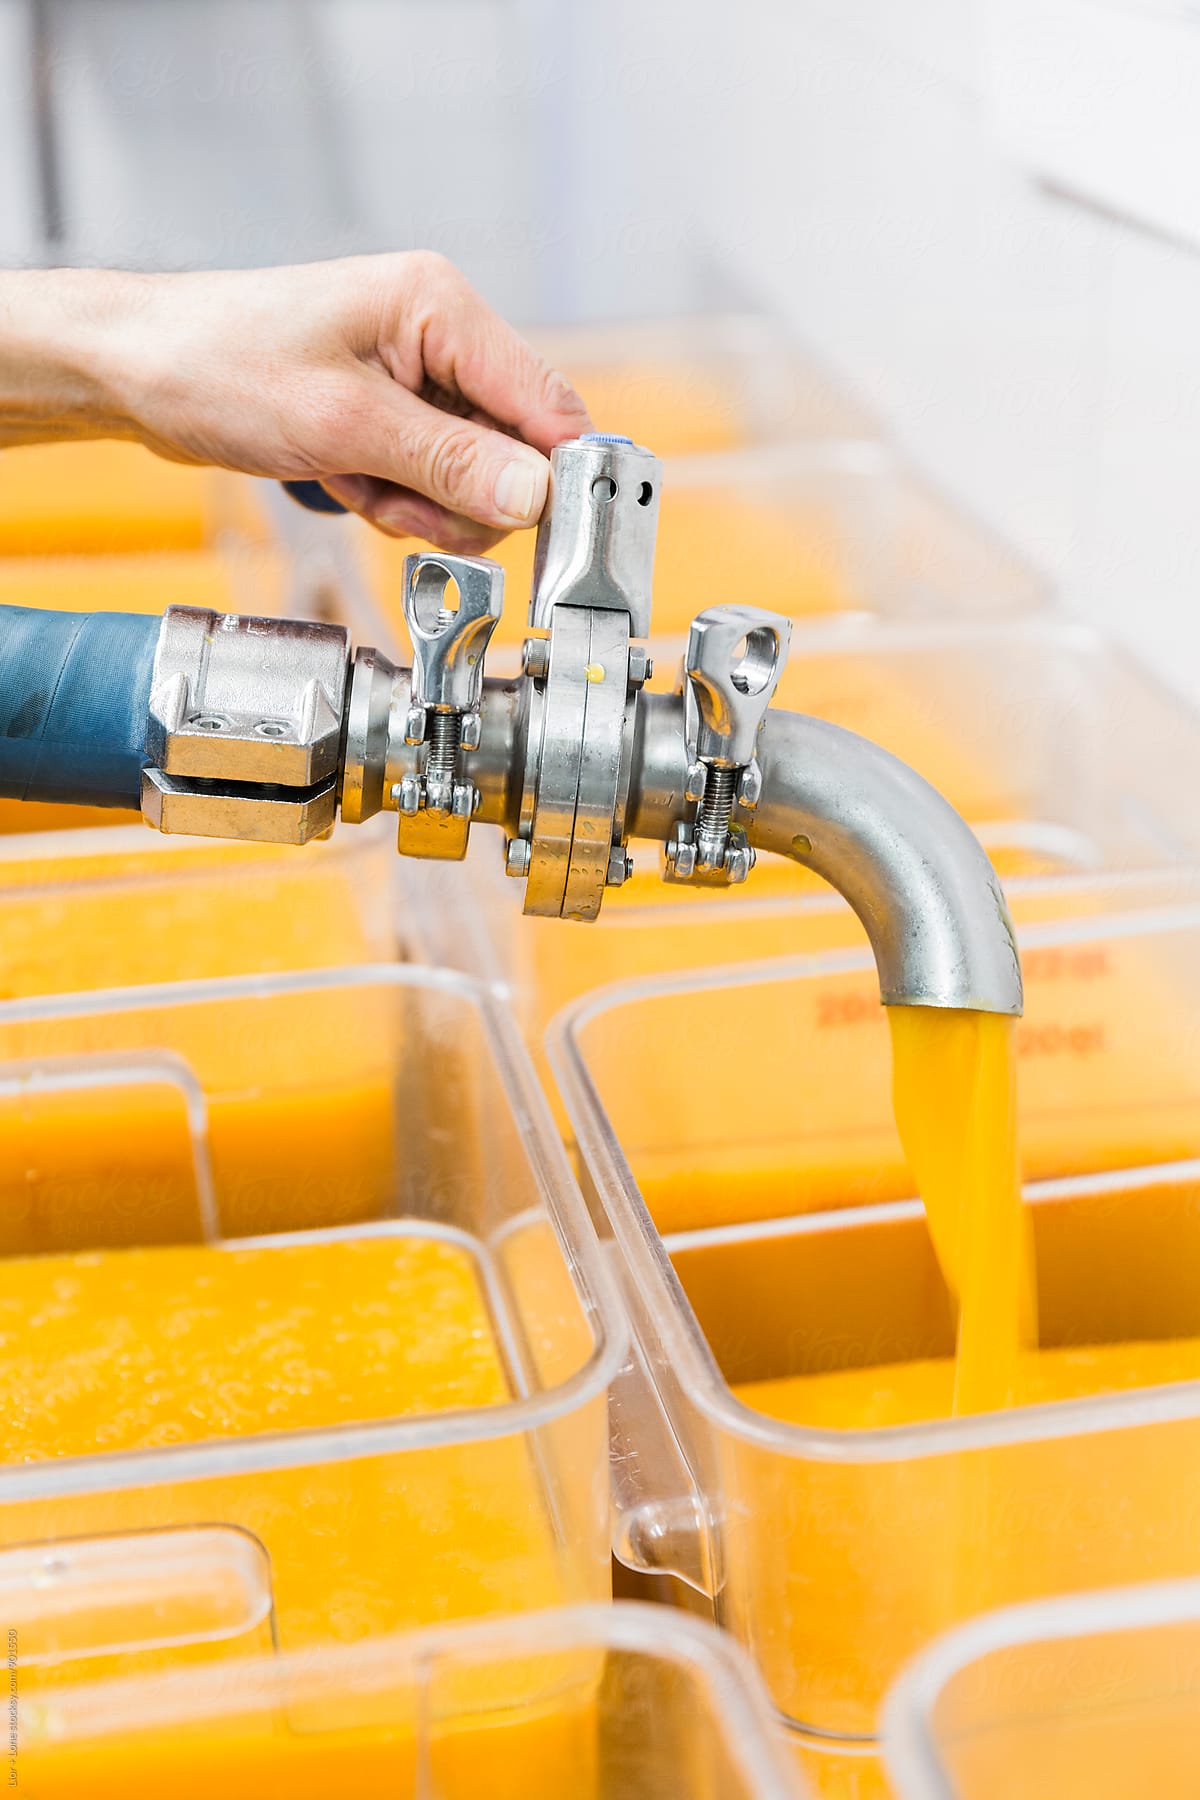 Hand holding industrial hose filling large containers with orange liquid